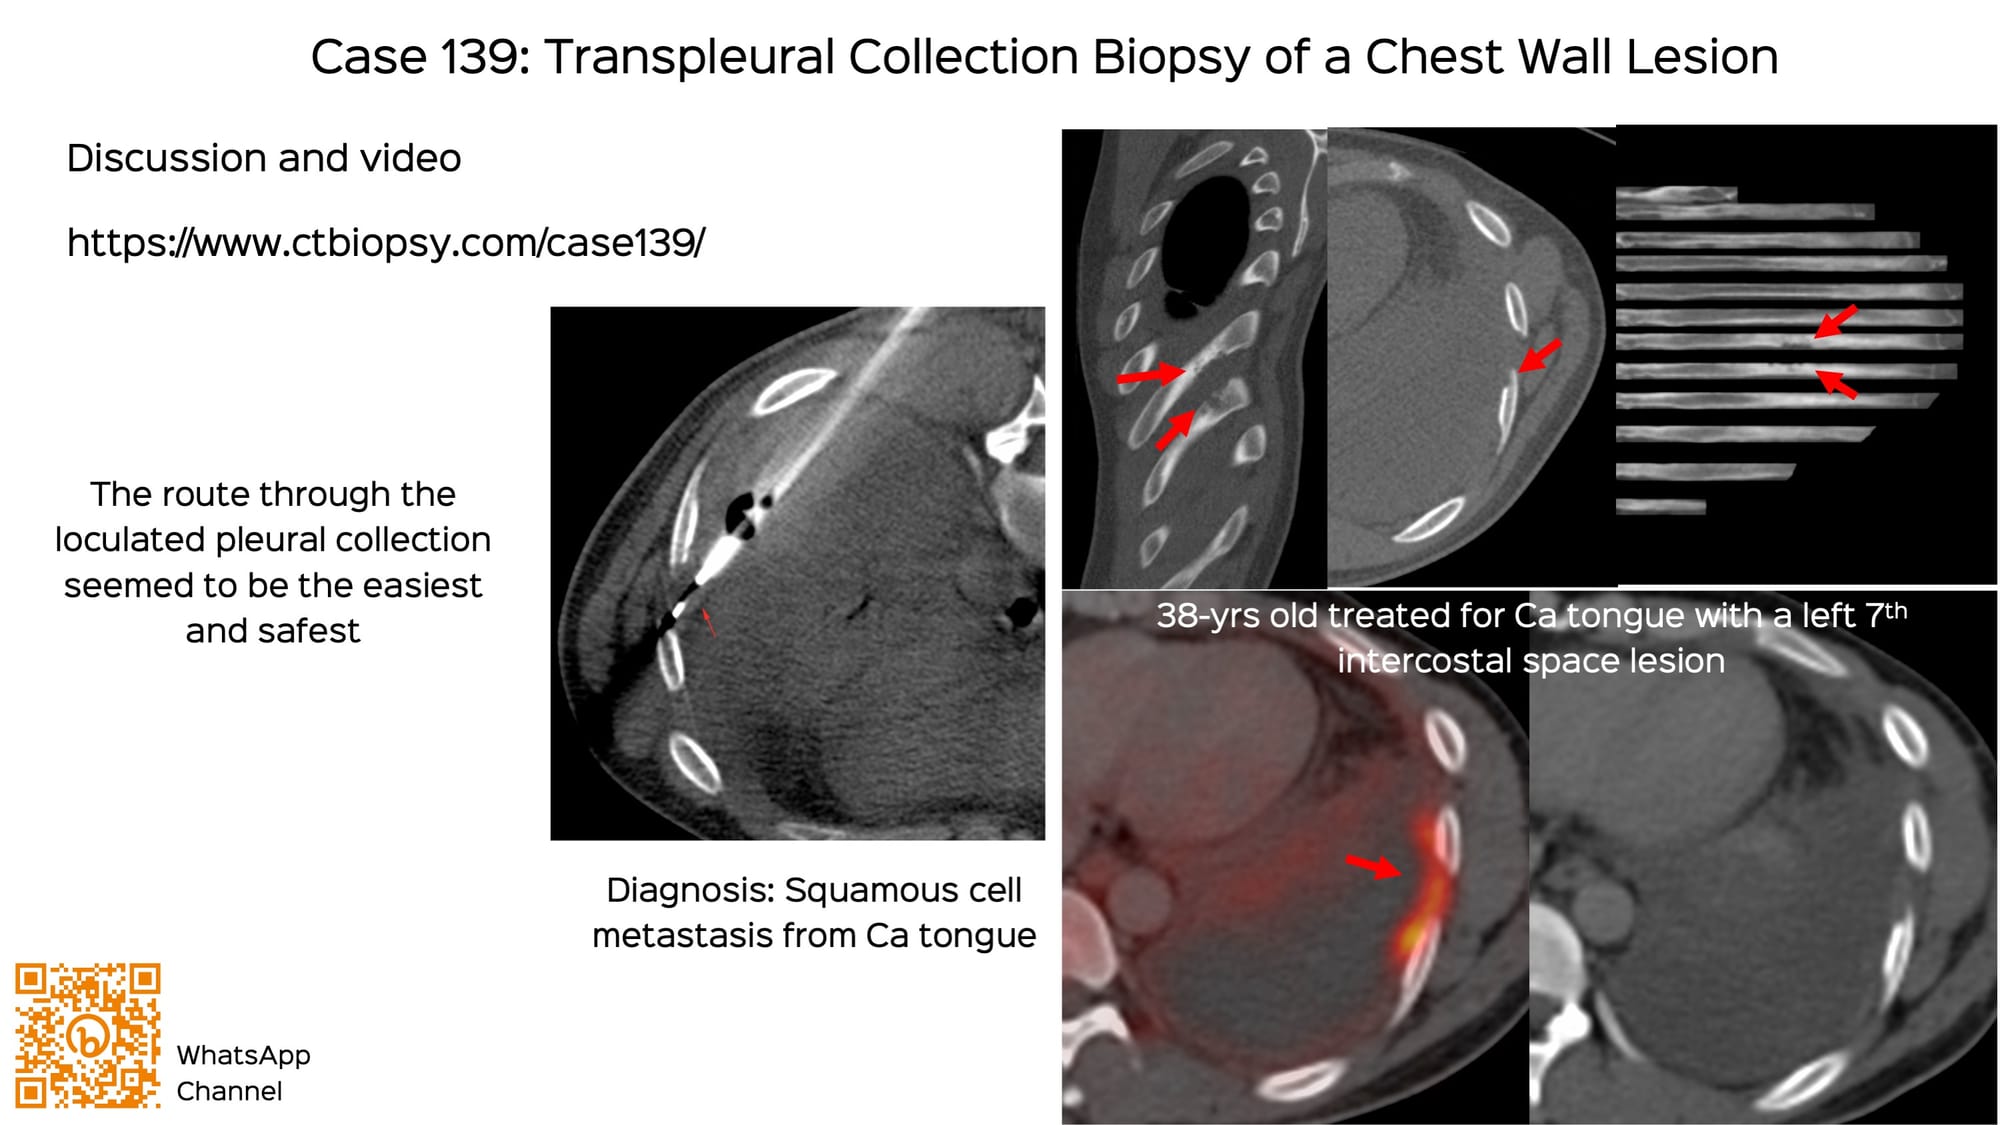 Case 139: Transpleural Collection Biopsy of a Chest Wall Lesion